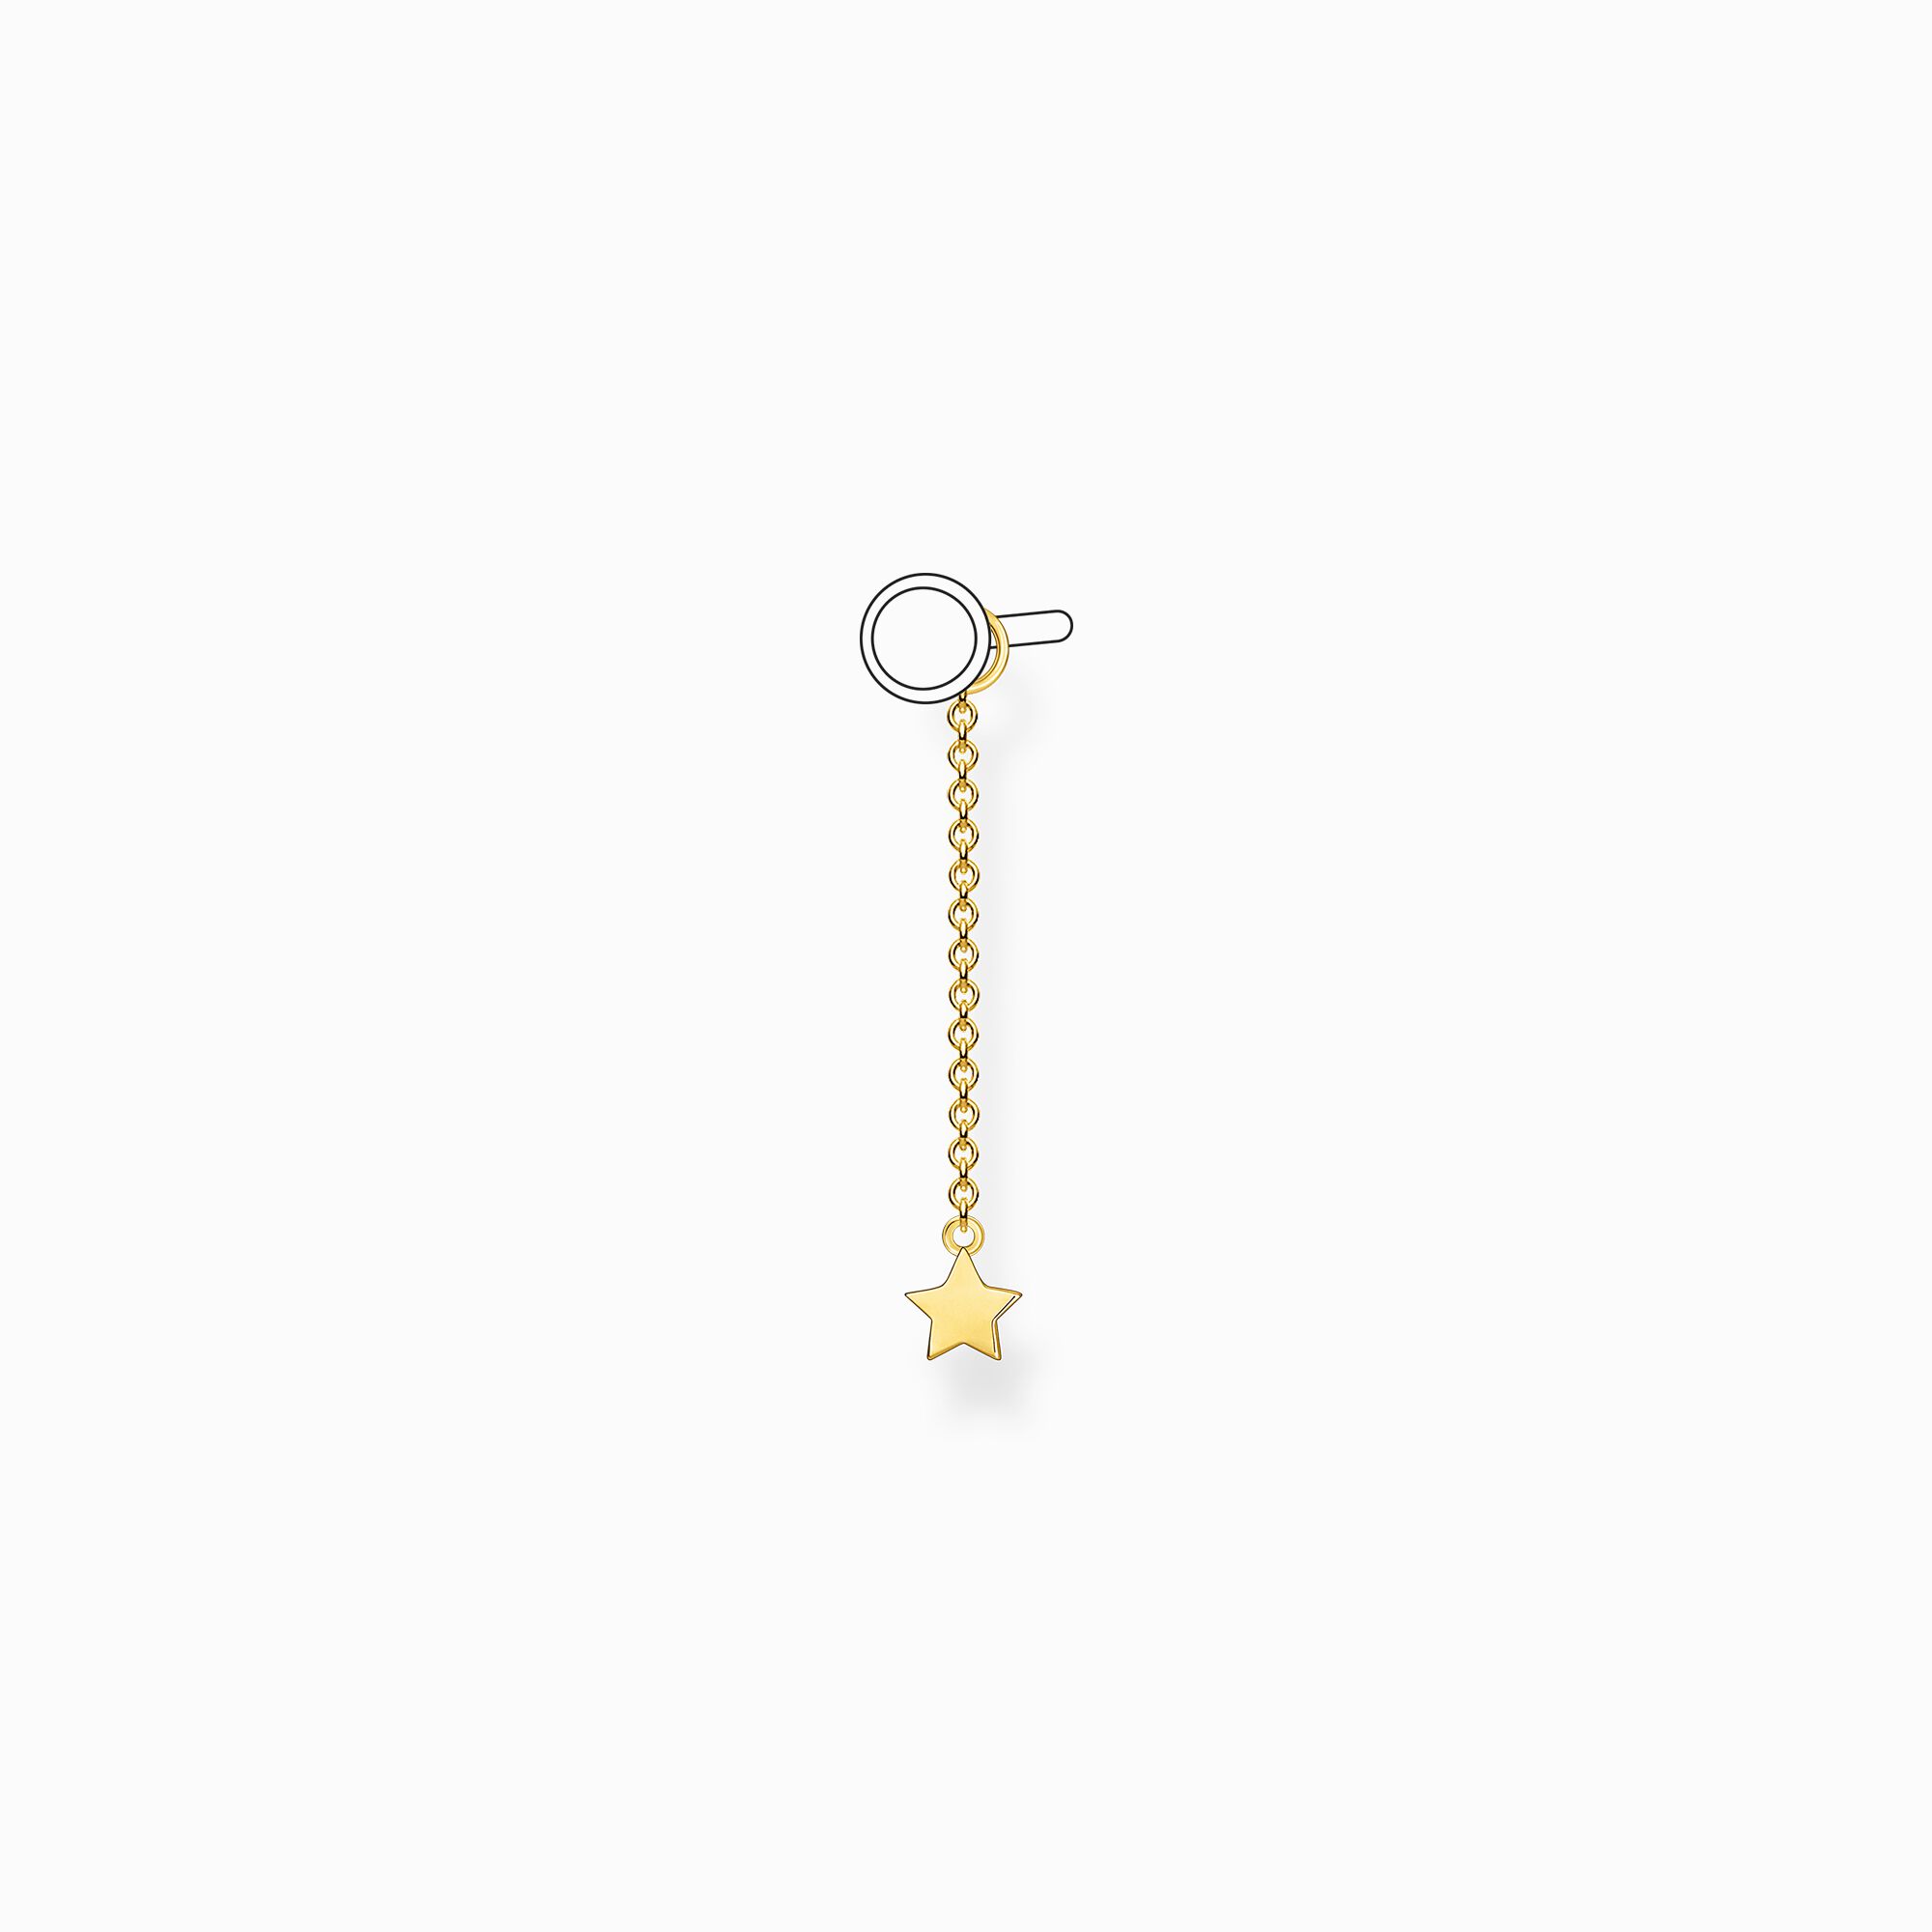 earring – Golden chain pendant SABO with THOMAS